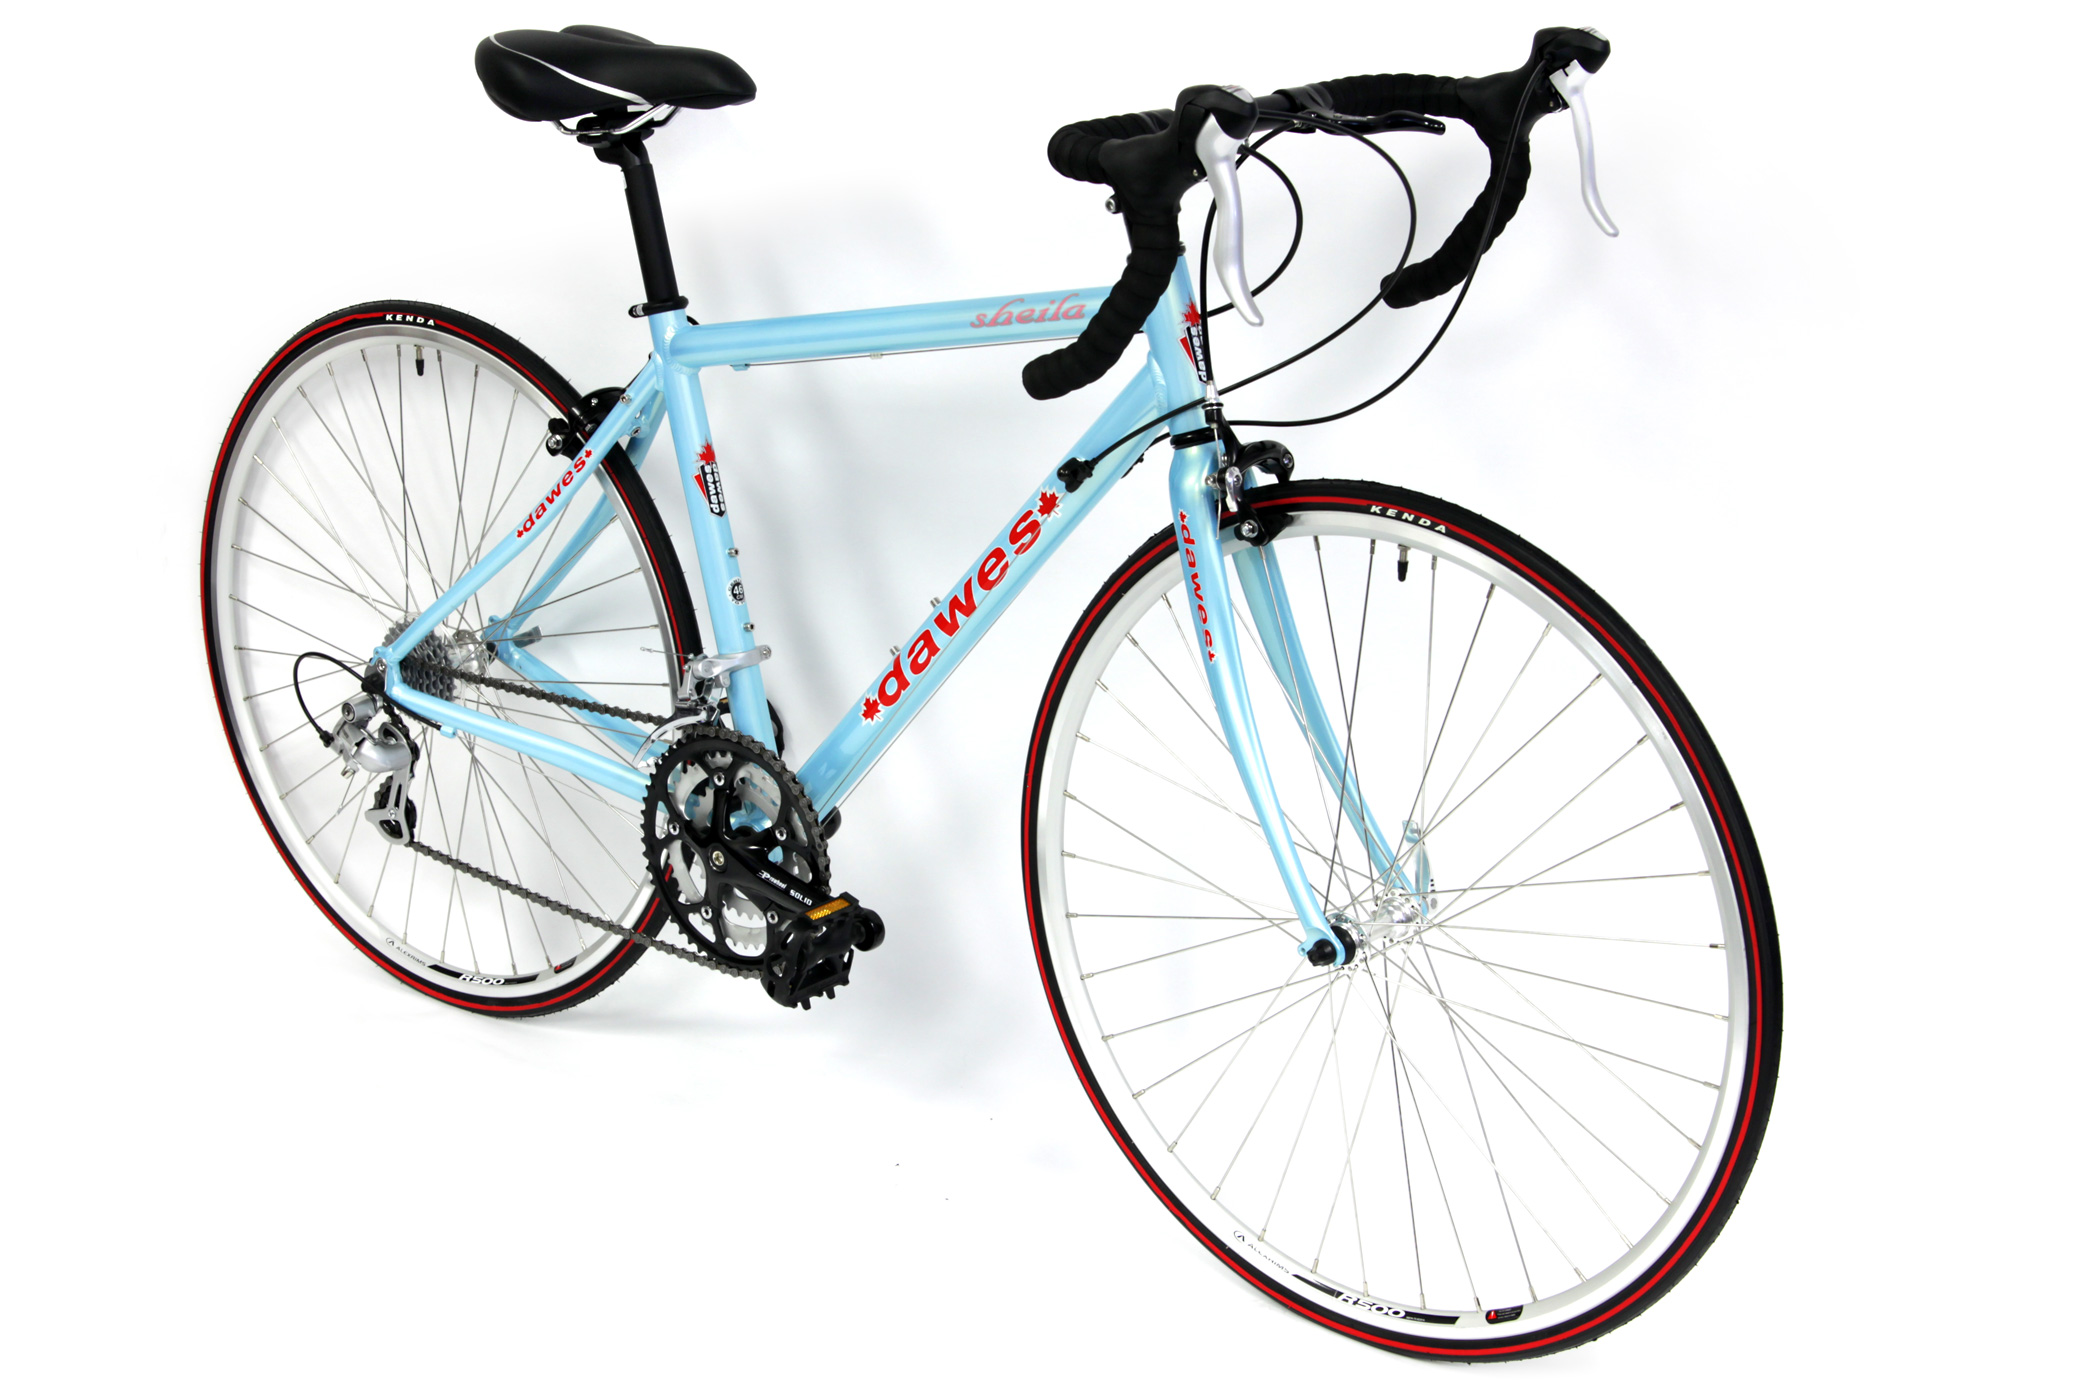 Save Up to 60% Off Womens Road and Fitness Bikes - Dawes Sheila Women Specific Road Bike